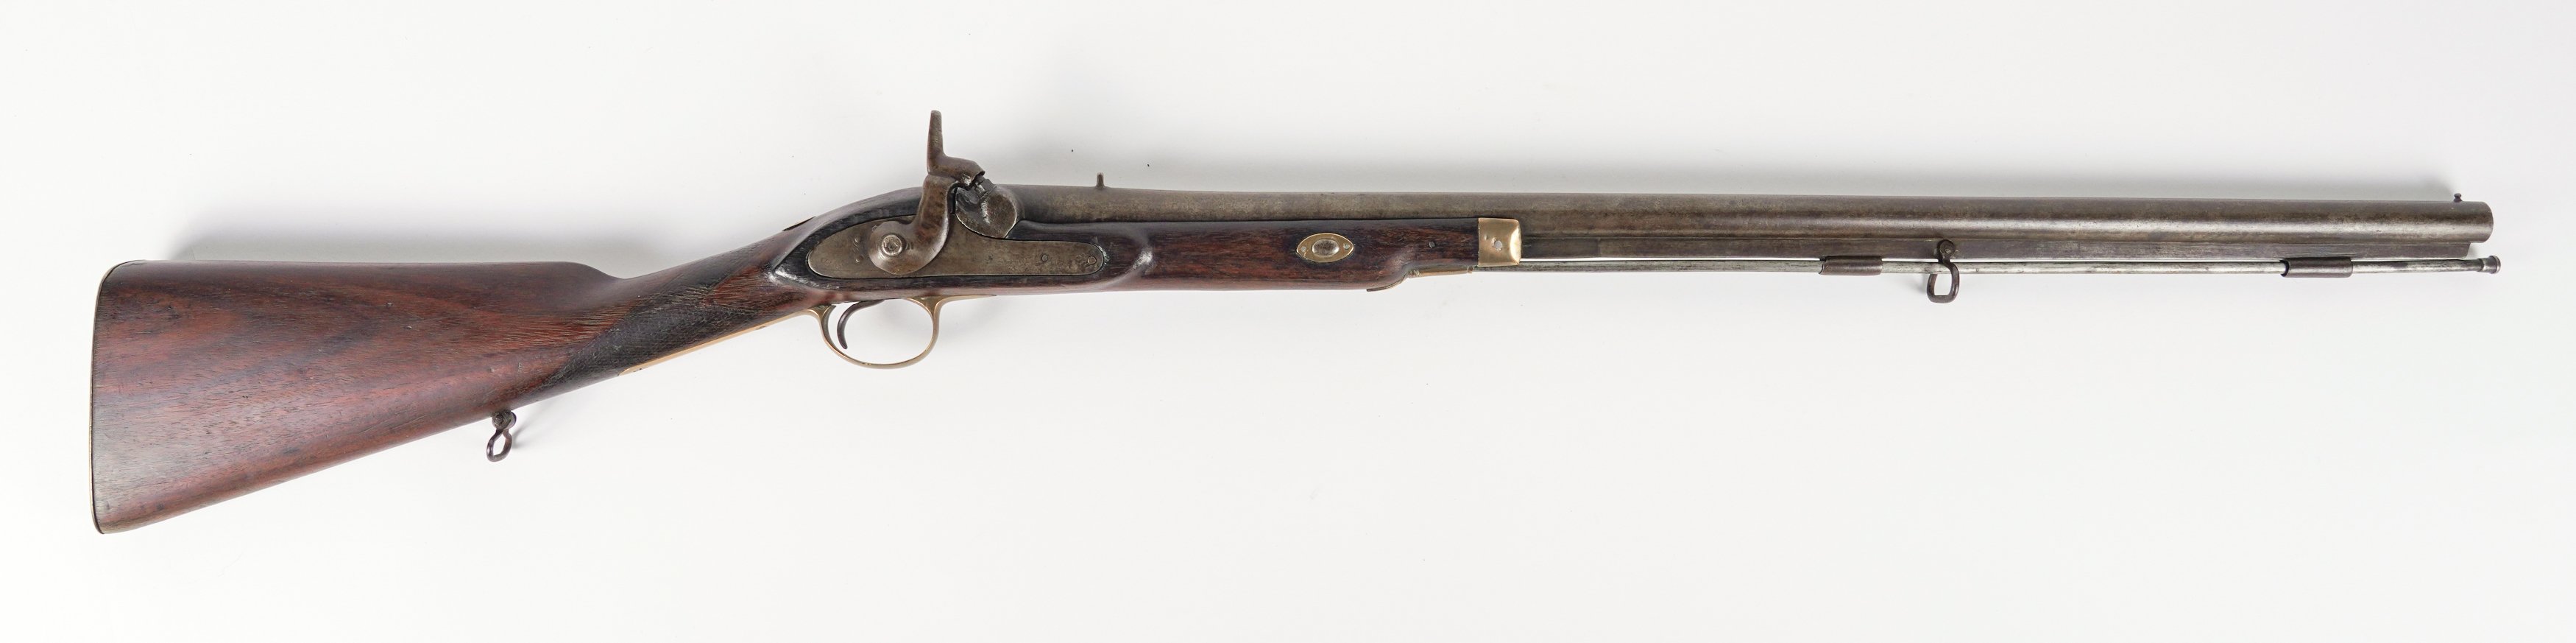 A PERCUSSION ACTION RIFLE - Image 2 of 3